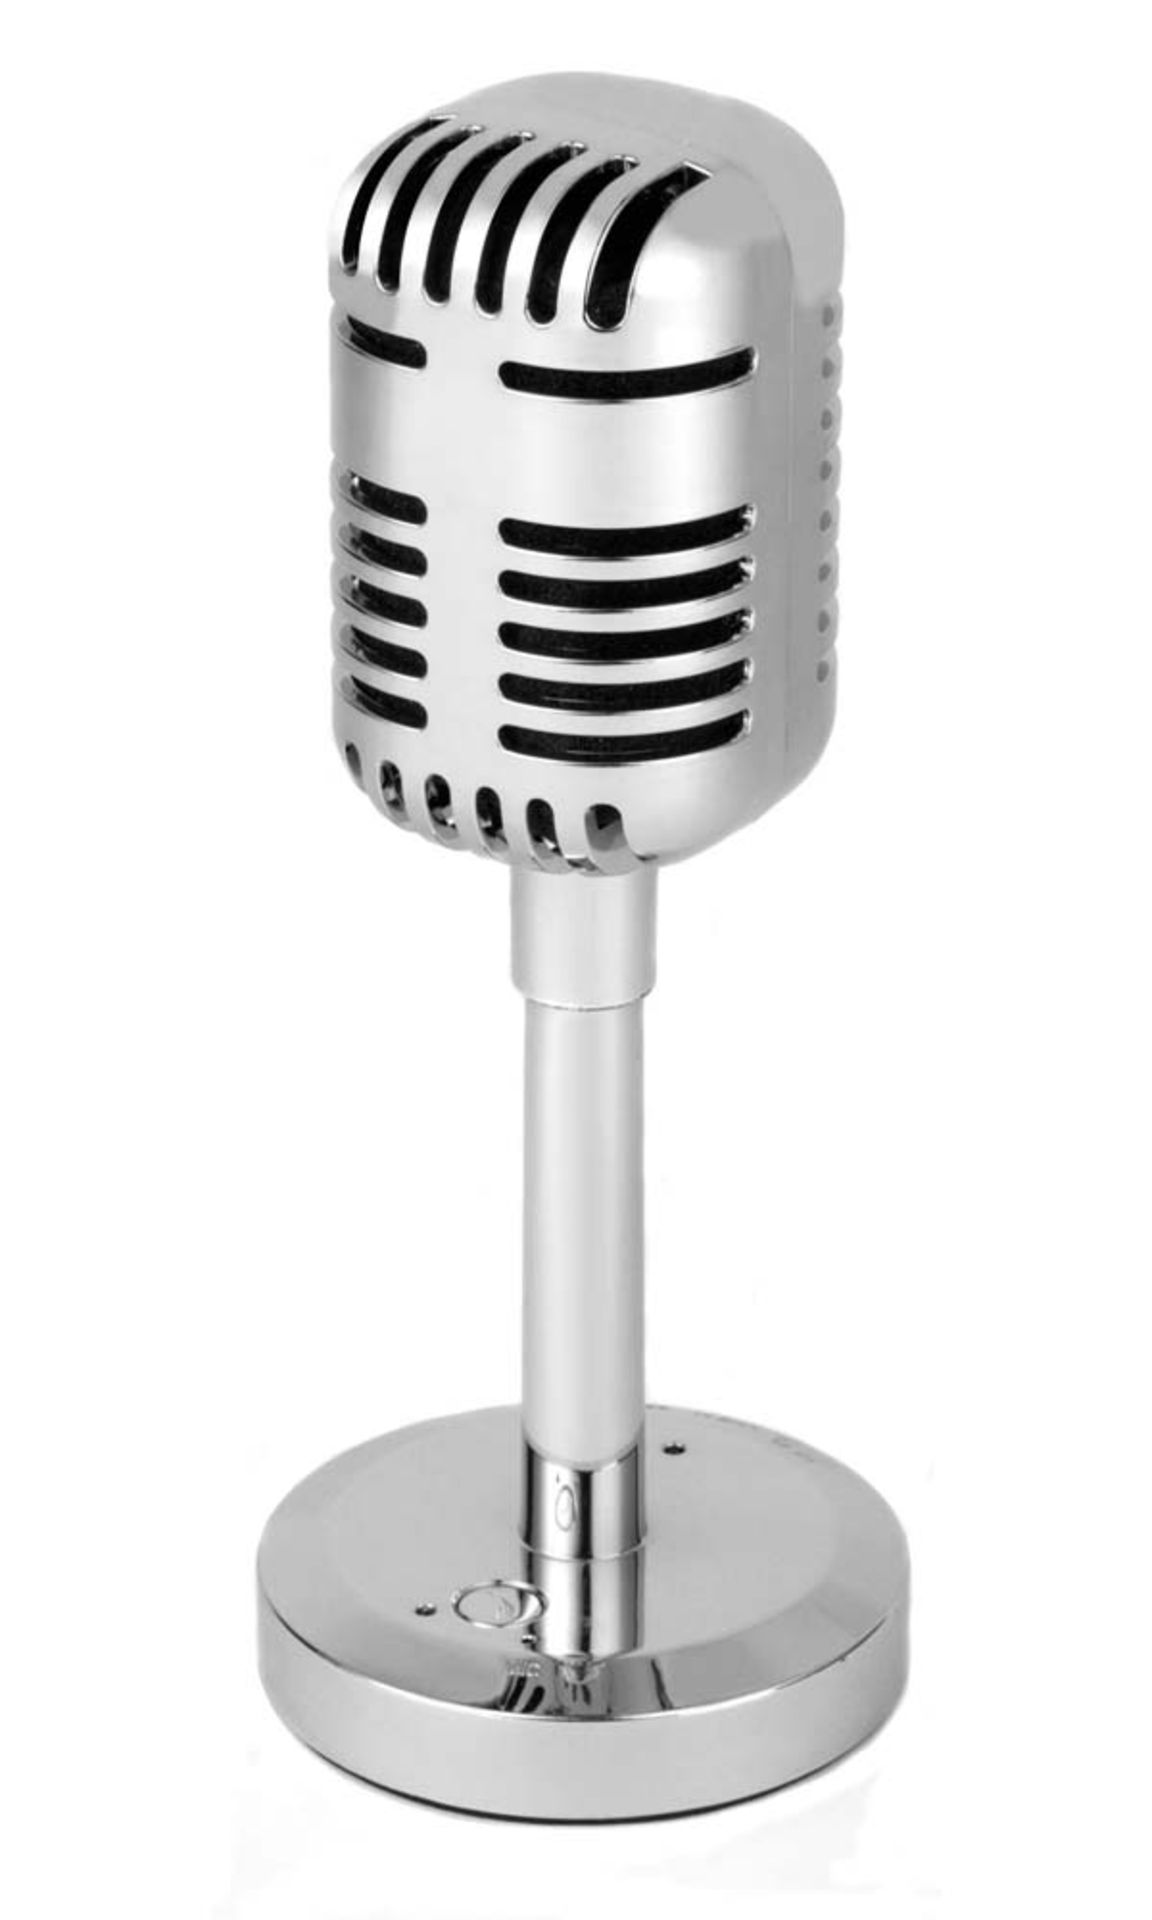 V Brand New Intempo Portable Microphone Speaker -Bluetooth - Built-In Microphone - Charging - Image 2 of 2